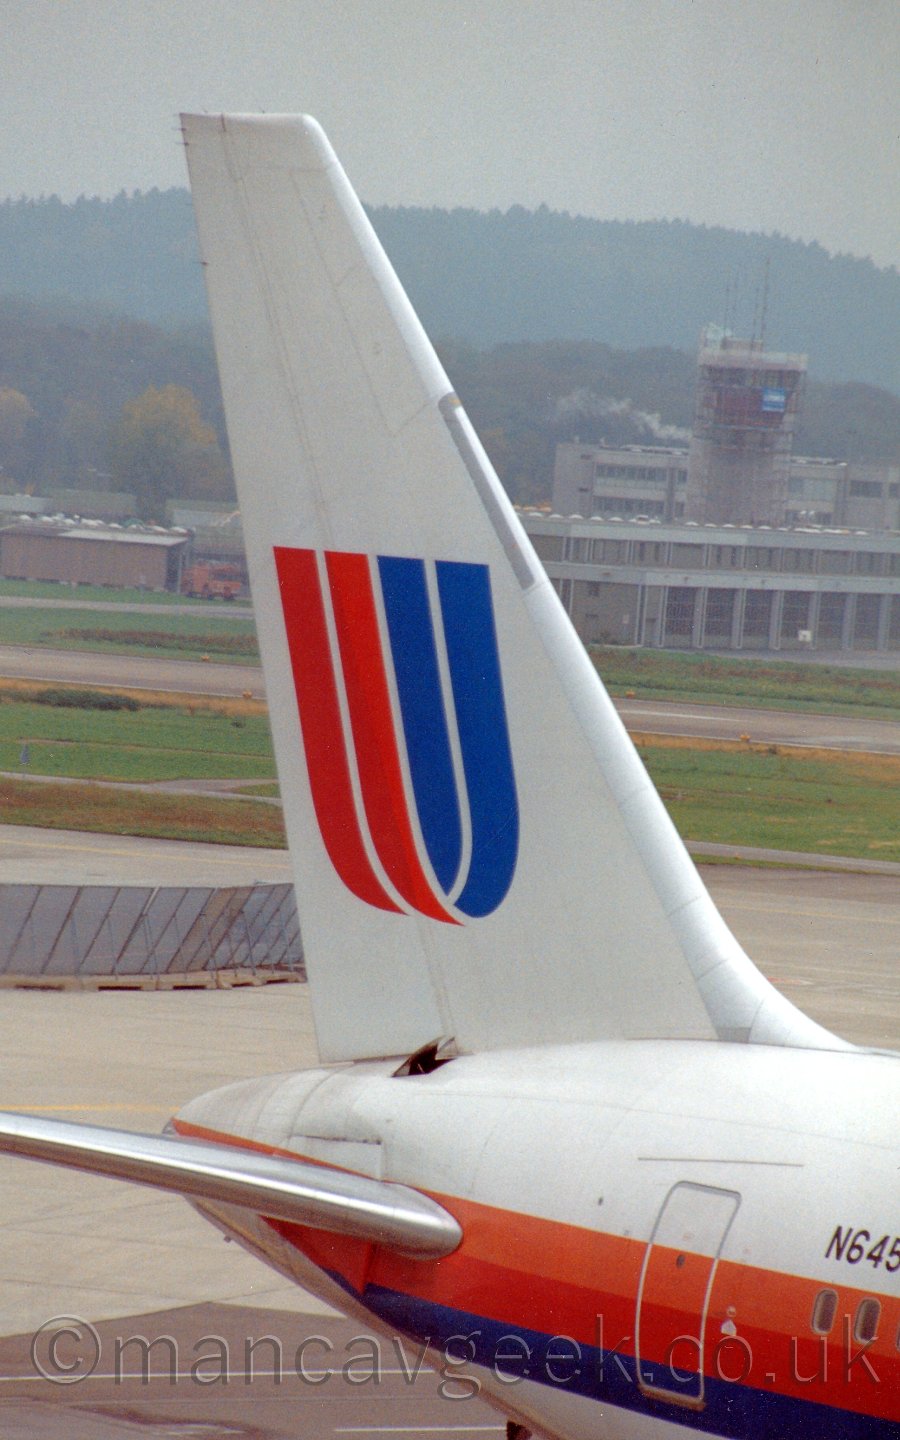 Closeup of the tail of a jet airliner parked facing just off to the right of the camera. the plane is mostly white, with an orange, red, and blue cheatline running along the body, and the registration "N645UA" on the upper forward fuselage in black, the last 2 letters cut off by the side of the frame. The tail is white, with a large letter "U" which looks too be shaped from a piece of ribbon, red and orange on one side, blue on the other. There is a small hatch open on the upper rear fuselage, in the middle of the join with the tail. In the background, taxiways and a runway are seperated by grass, with a large grey building on the far side, and trees on a hill beyond that, meeting hazy grey clouds.